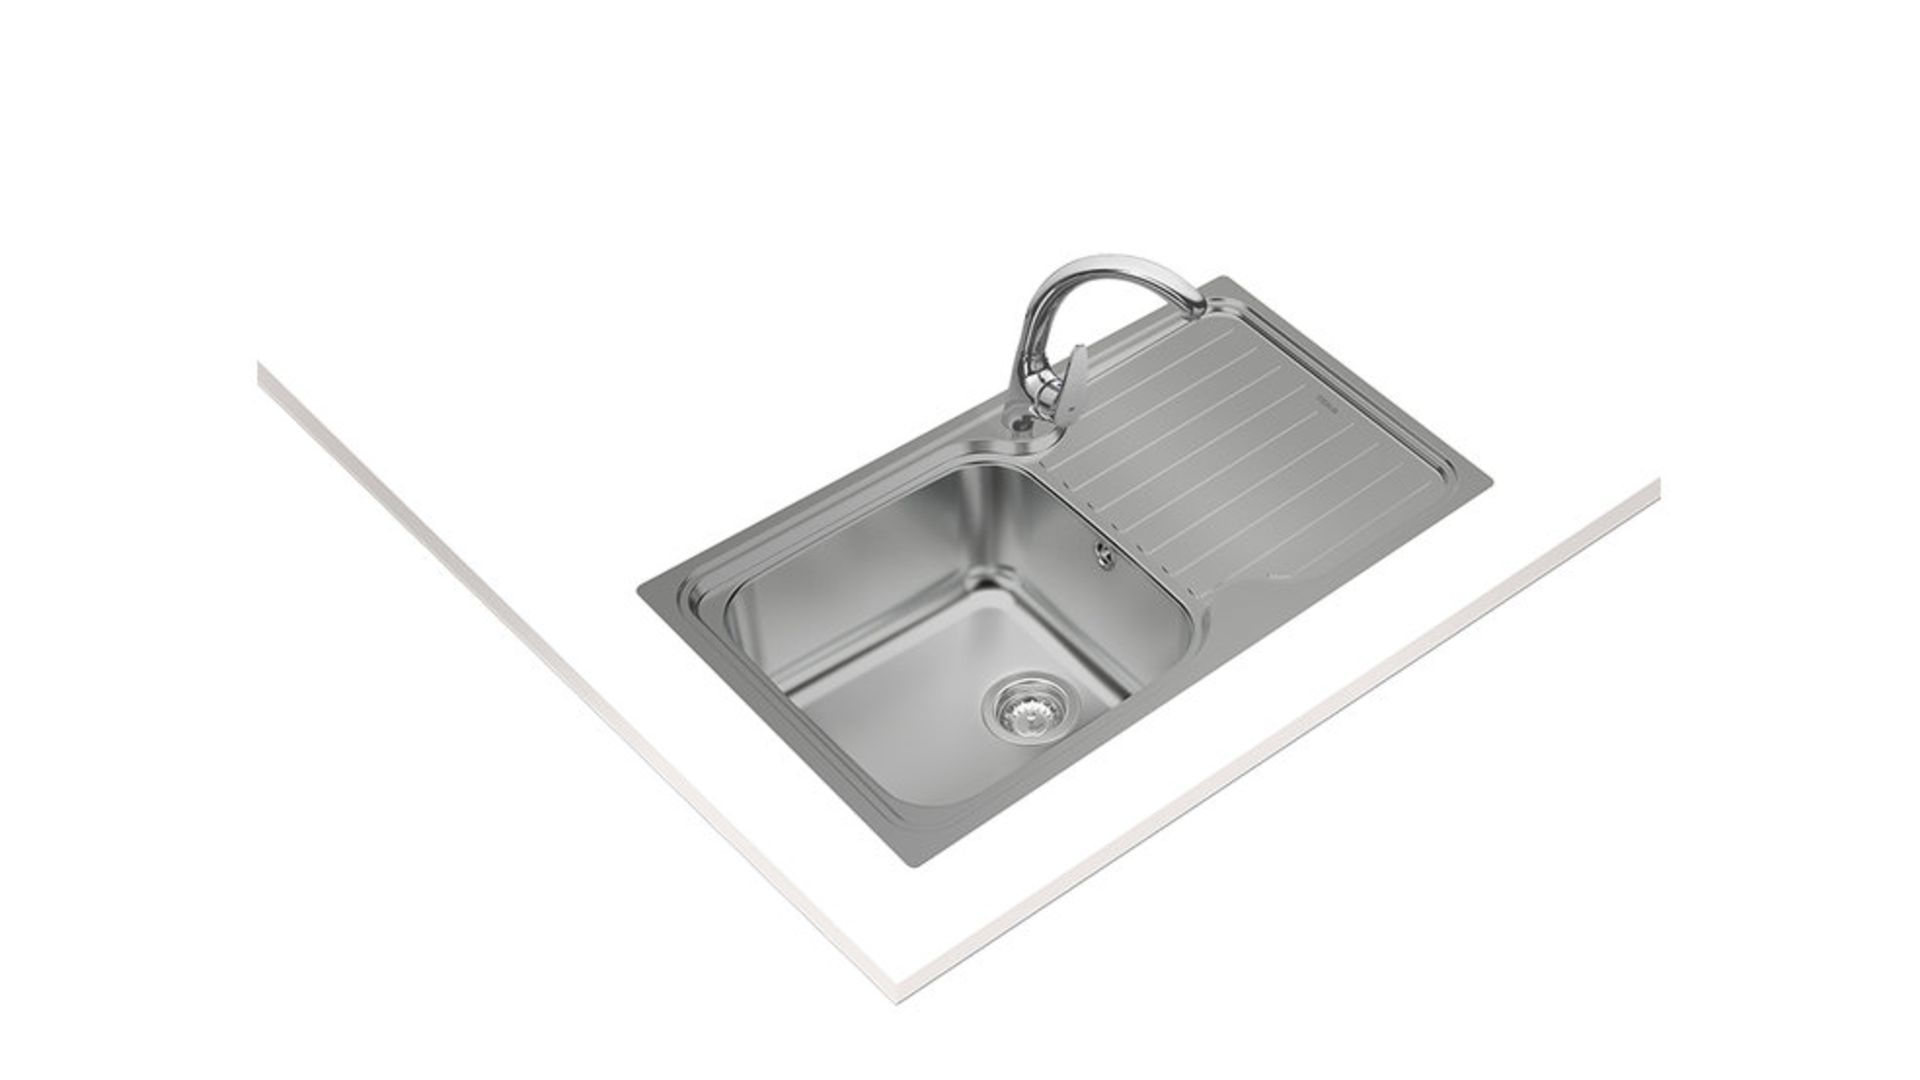 NEW (M163) Inset Stainless Steel Sink One bowl and One drainer Right Hand. Inset Sink, One bowl... - Image 2 of 2